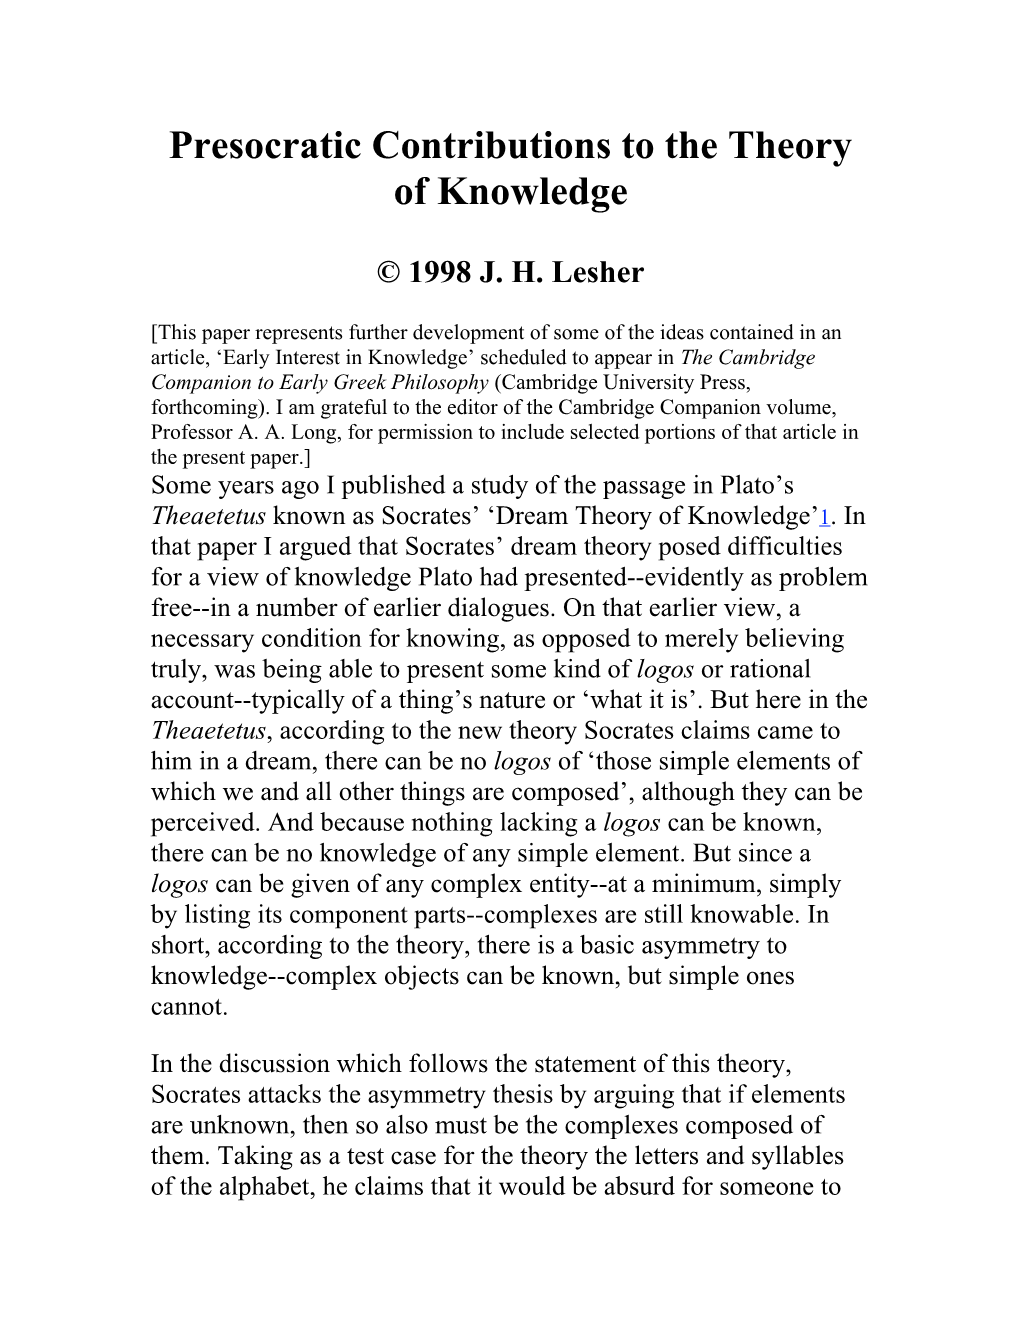 Presocratic Contributions to the Theory of Knowledge